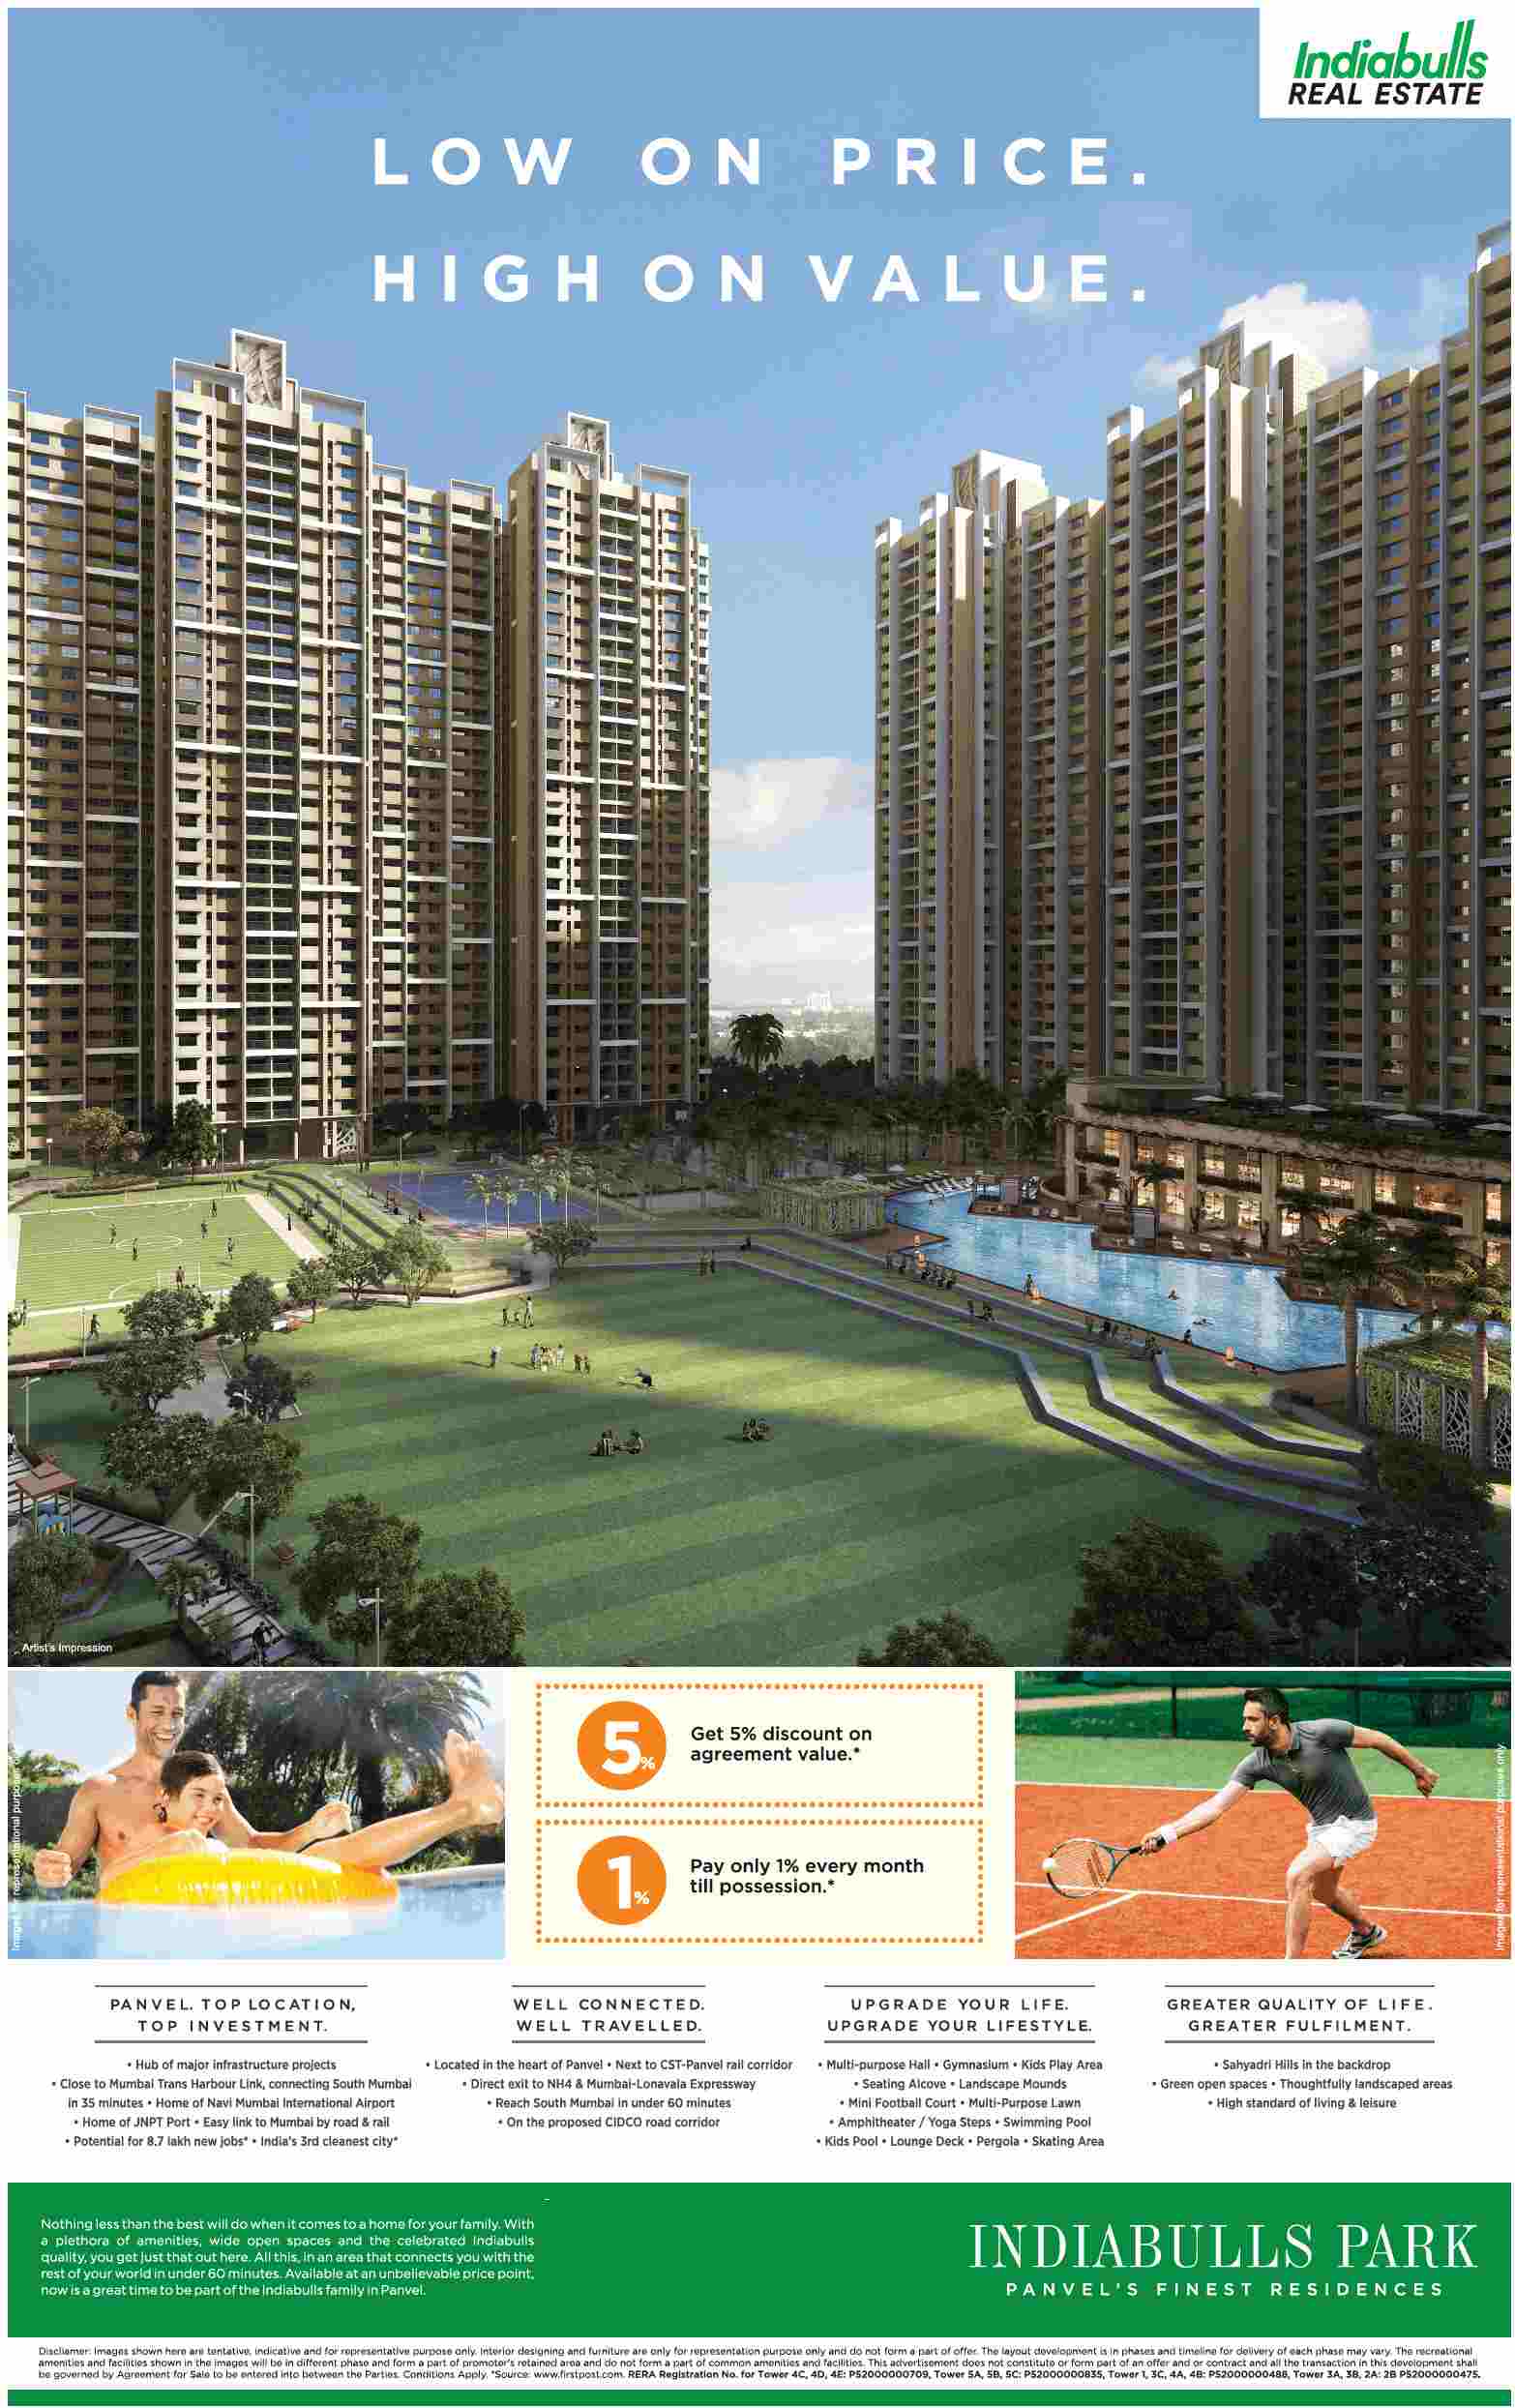 Pay only 1% every month till possession at Indiabulls Park in Navi Mumbai Update